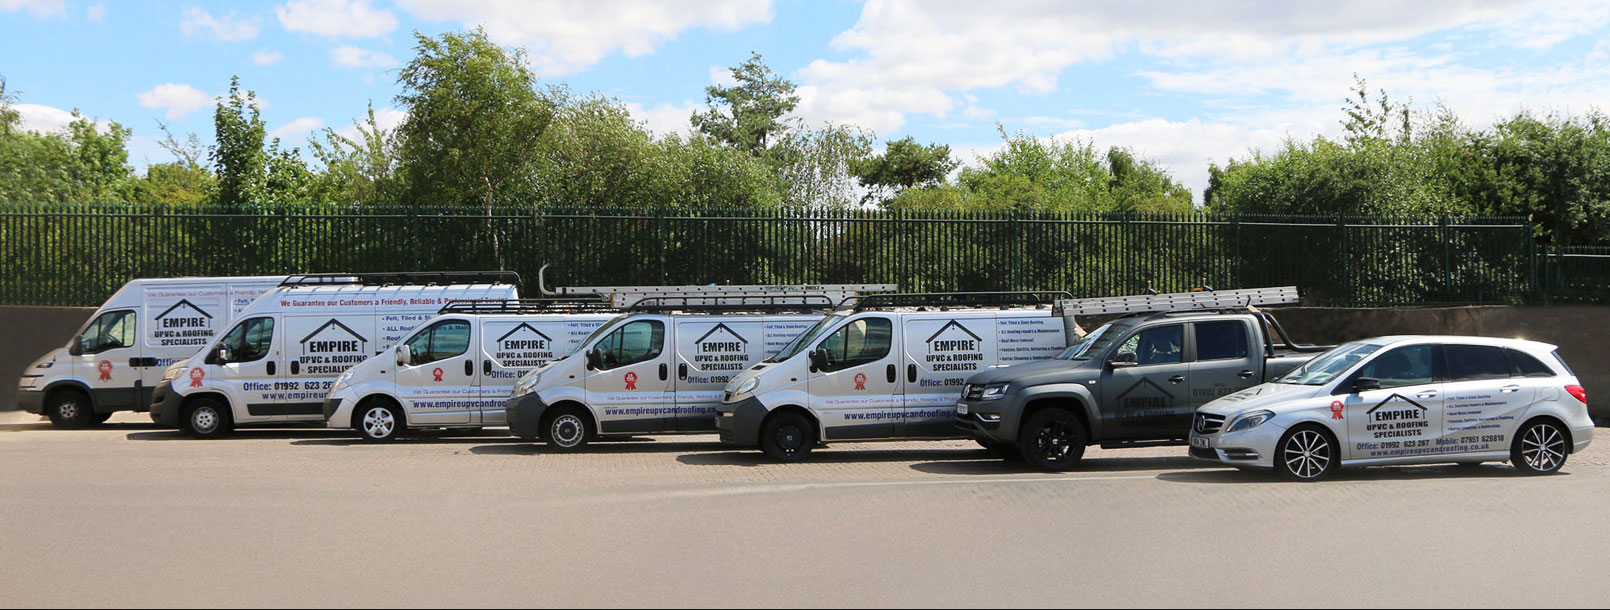 Hertfordshire Roofers and UPVC Fitters | Empire Roofing | Empire Vehicles